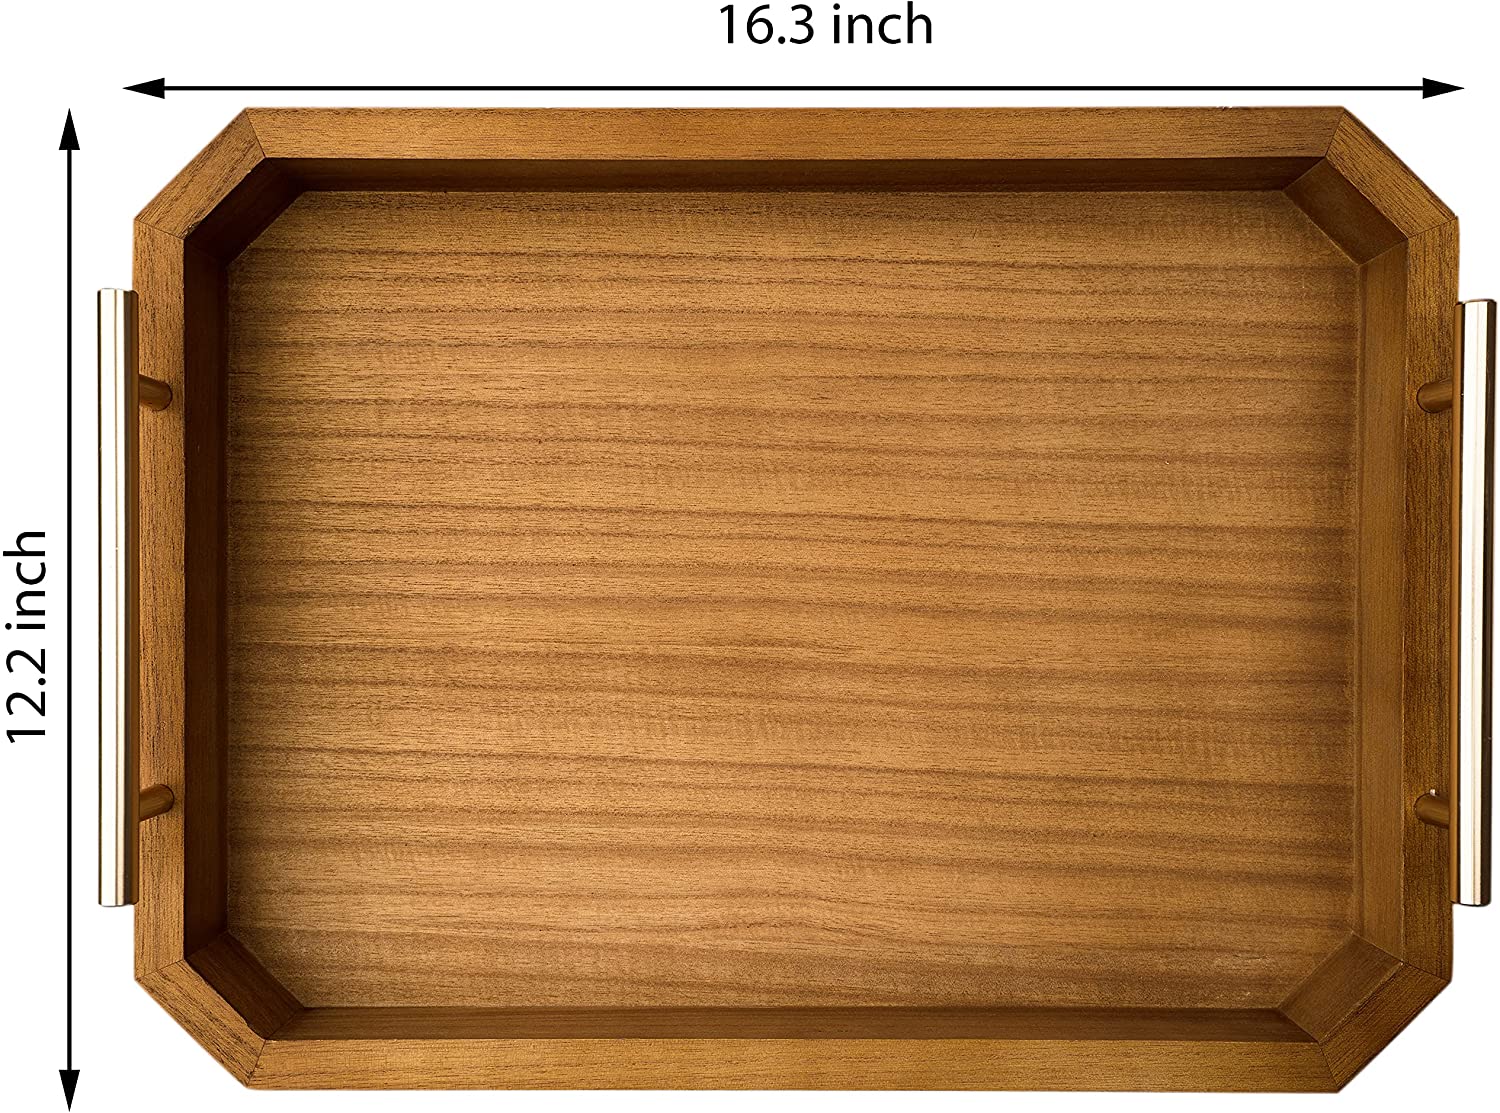 Wooden Ottoman Serving Tray - Paulownia Wood Platter Board with Gold Metal Handles